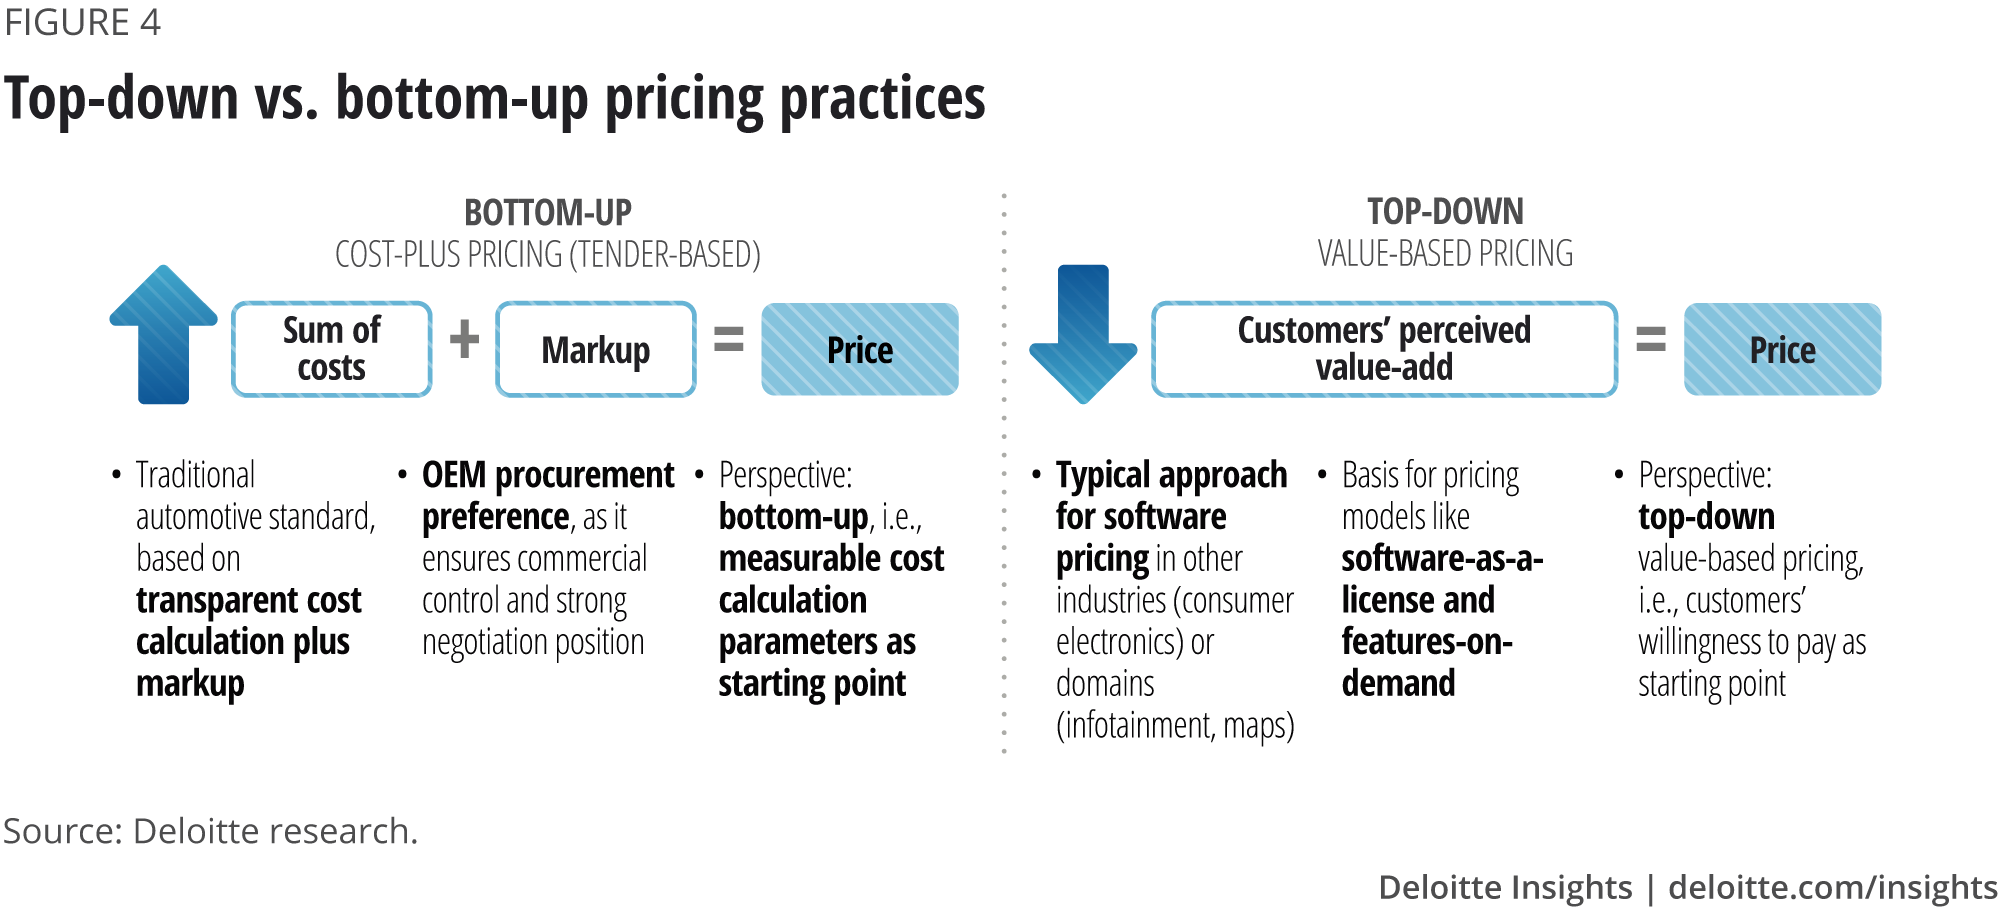 Top-down vs. bottom-up pricing practices